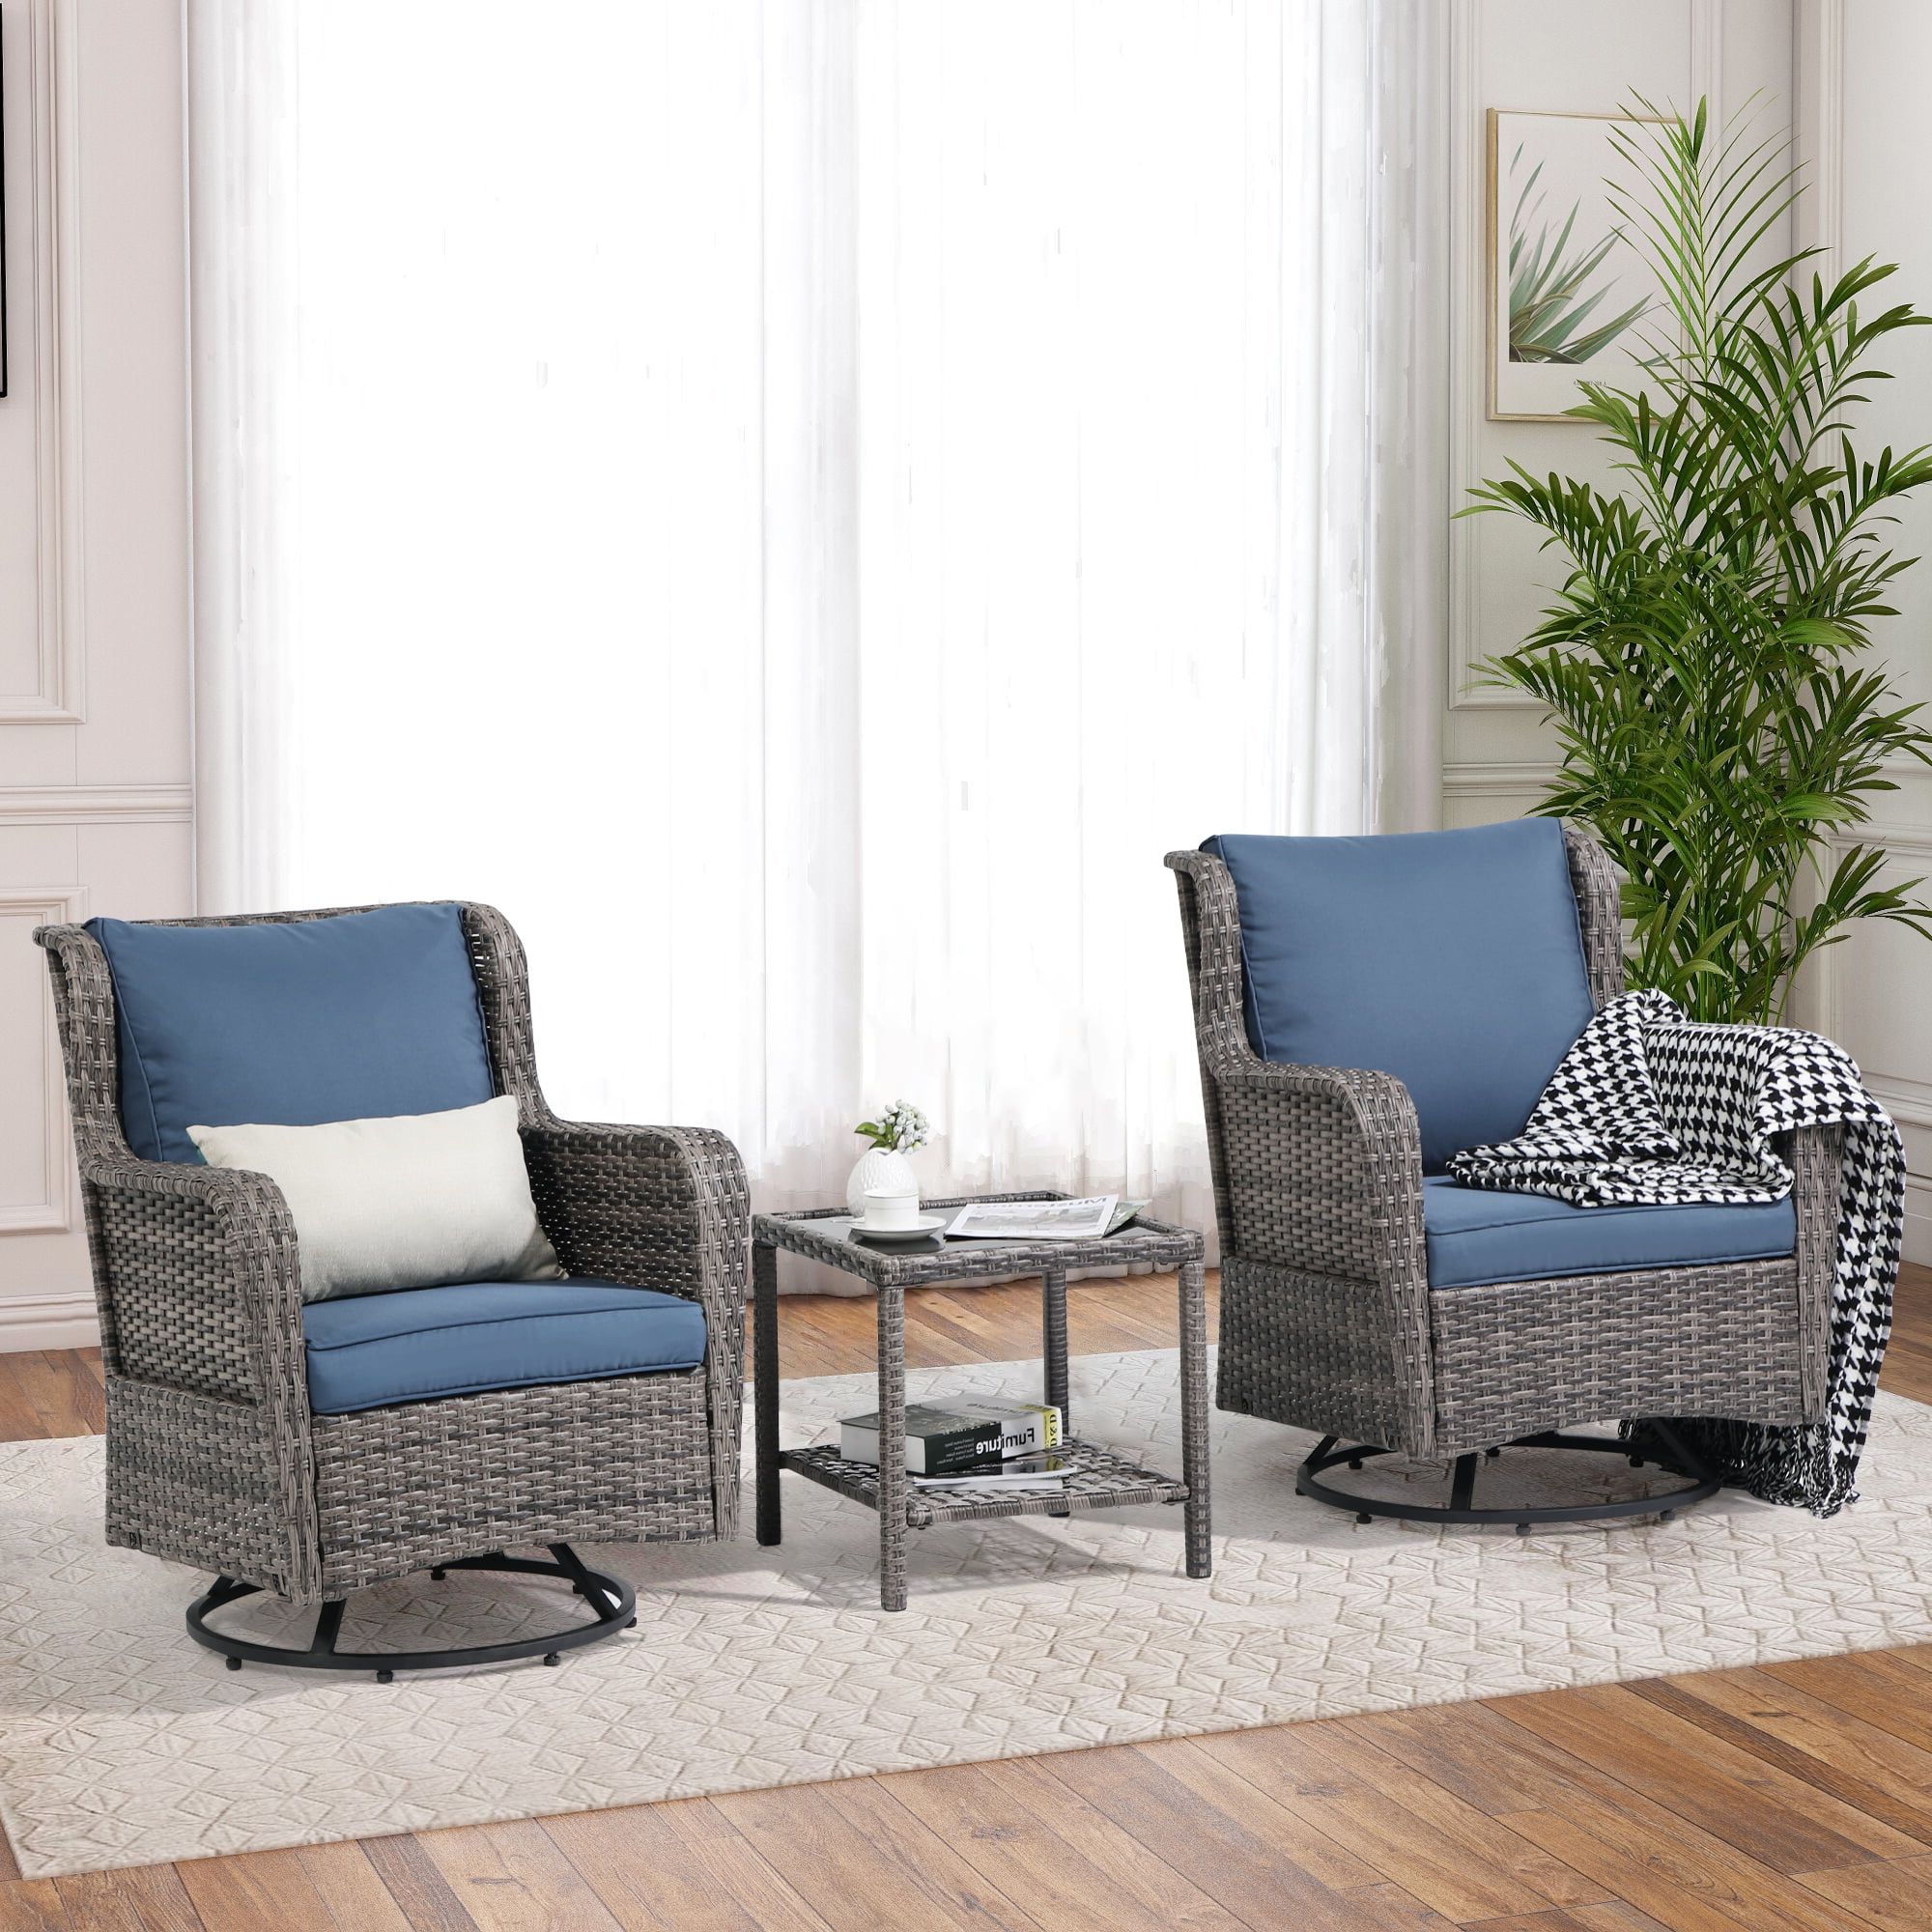 Side Table Iron Frame Patio Furniture Set Regarding Popular Joivi Patio Swivel Rocker Set, Outdoor Wicker Swivel Rocking Chairs With Side  Table, 3 Pieces All Weather Rattan Furniture Bistro Set With Thick  Cushions, Iron Frame, Navy Blue – Walmart (View 2 of 15)